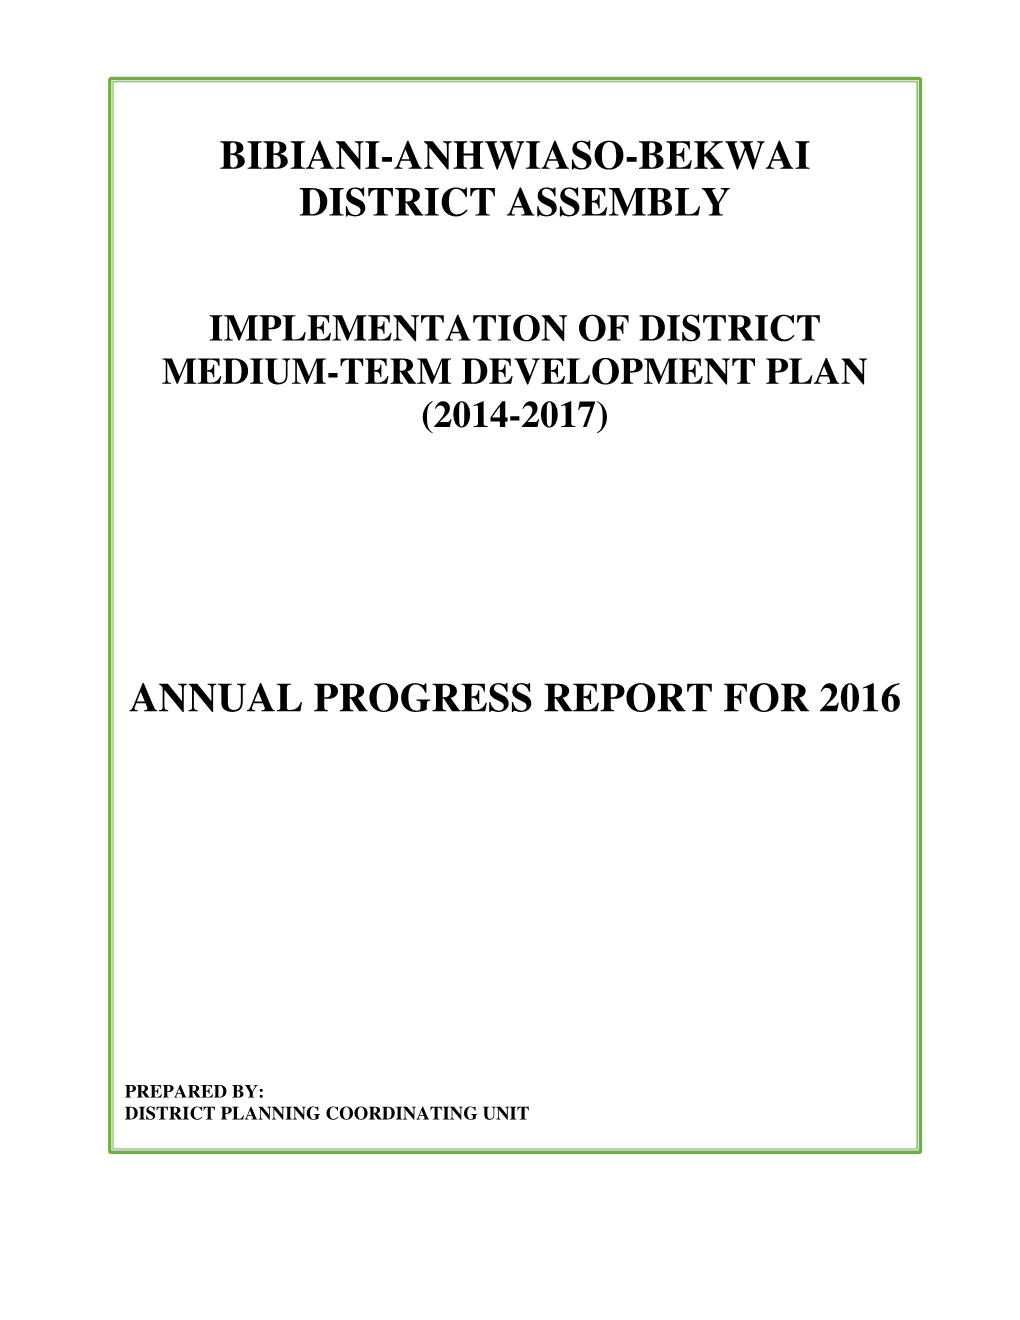 Bibiani-Anhwiaso-Bekwai District Assembly Annual